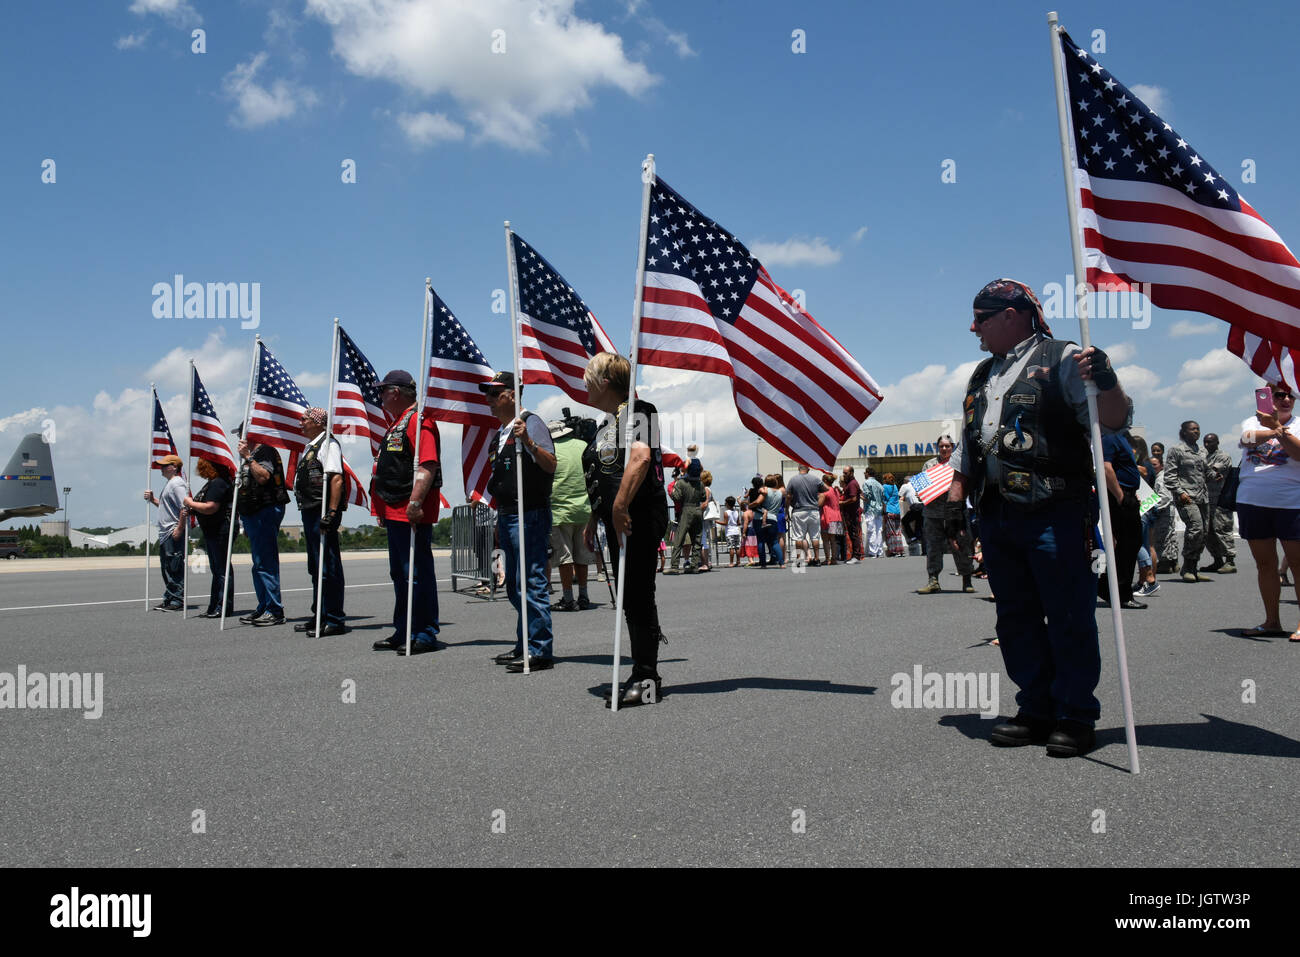 Members of the Patriot Guard, a National Motorcycle group form up at the exit to the flight line of the North Carolina Air National Guard, in order to salute and greet North Carolina Air National Guardsman returning from deployment, at the North Carolina Air National Guard Base, Charlotte Douglas International Airport, July 5th, 2017. The riders of the Patriot Guard arrived on base to help welcome back and honor the deployed Airmen of the 145th Airlift Wing, who returned home after months overseas supporting Operation Freedom’s Sentinel. Stock Photo